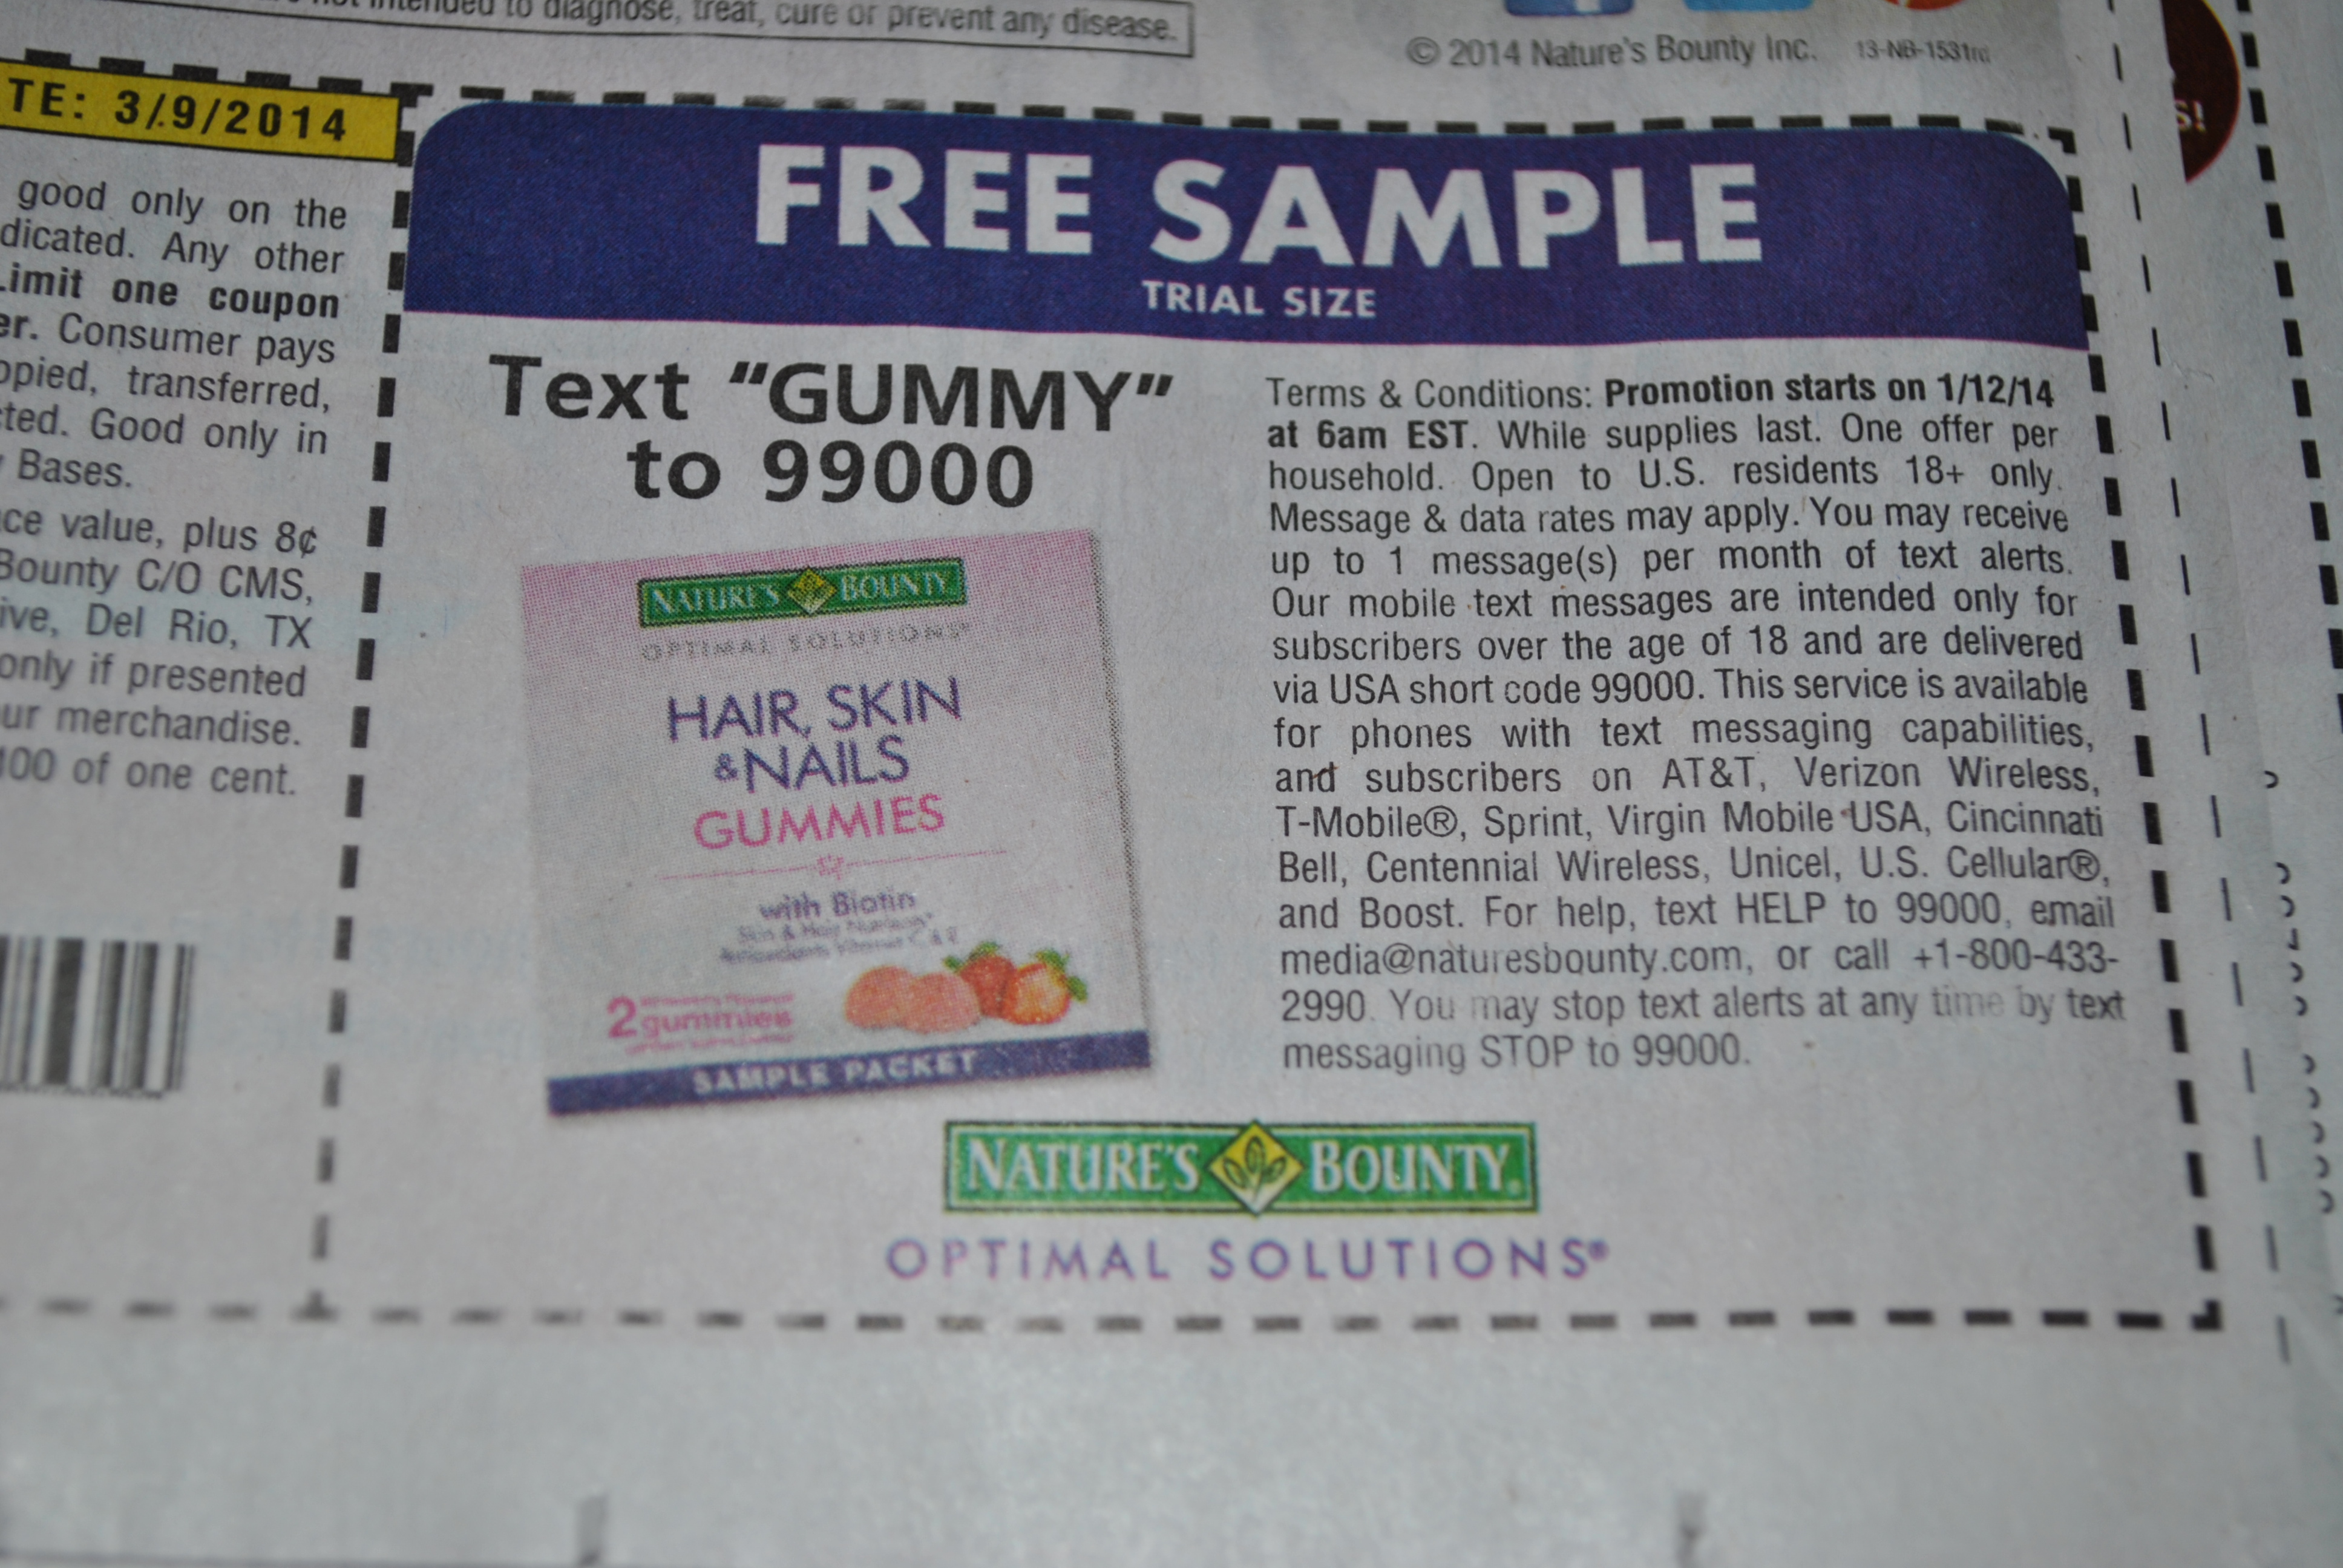 FREE Nature's Bounty Optimal Solutions Hair, Skin and Nails Gummies